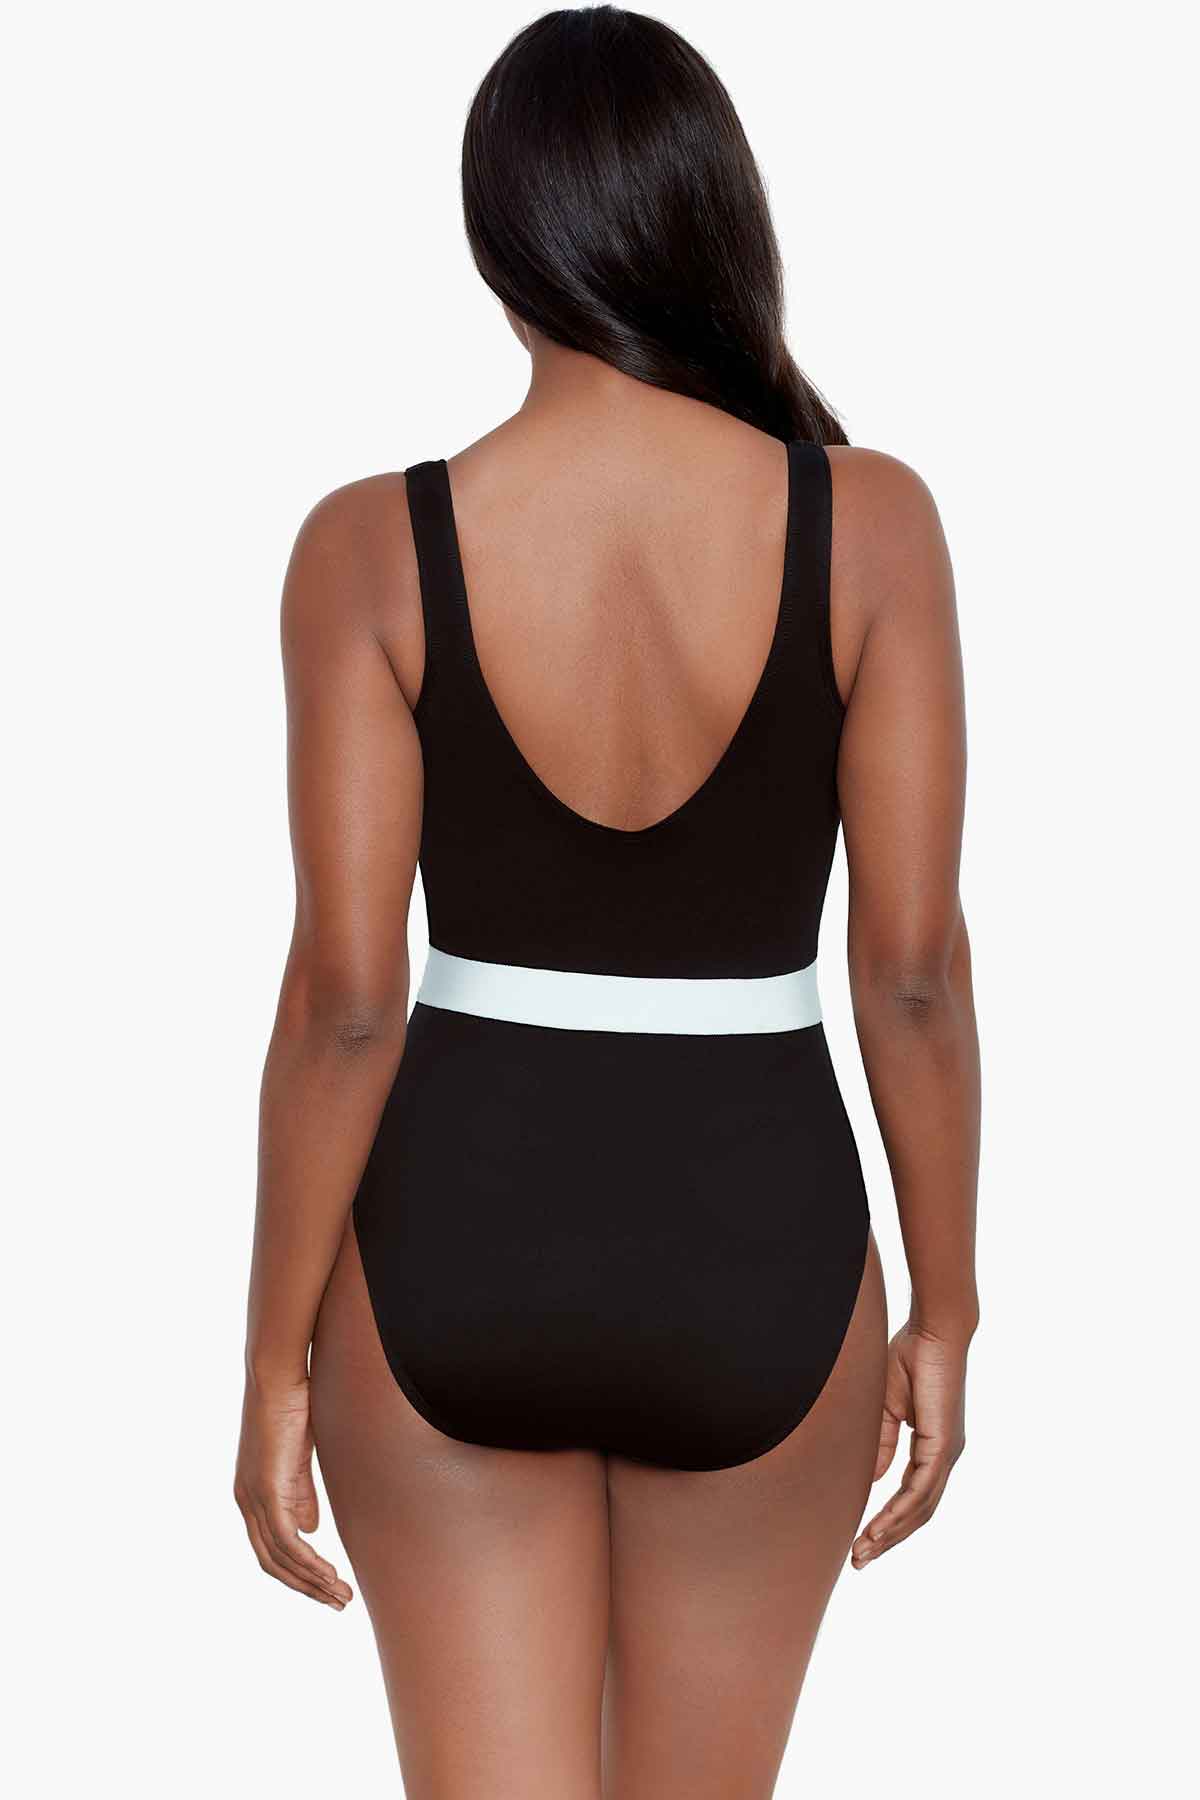 Miraclesuit Spectra Somerland One Piece